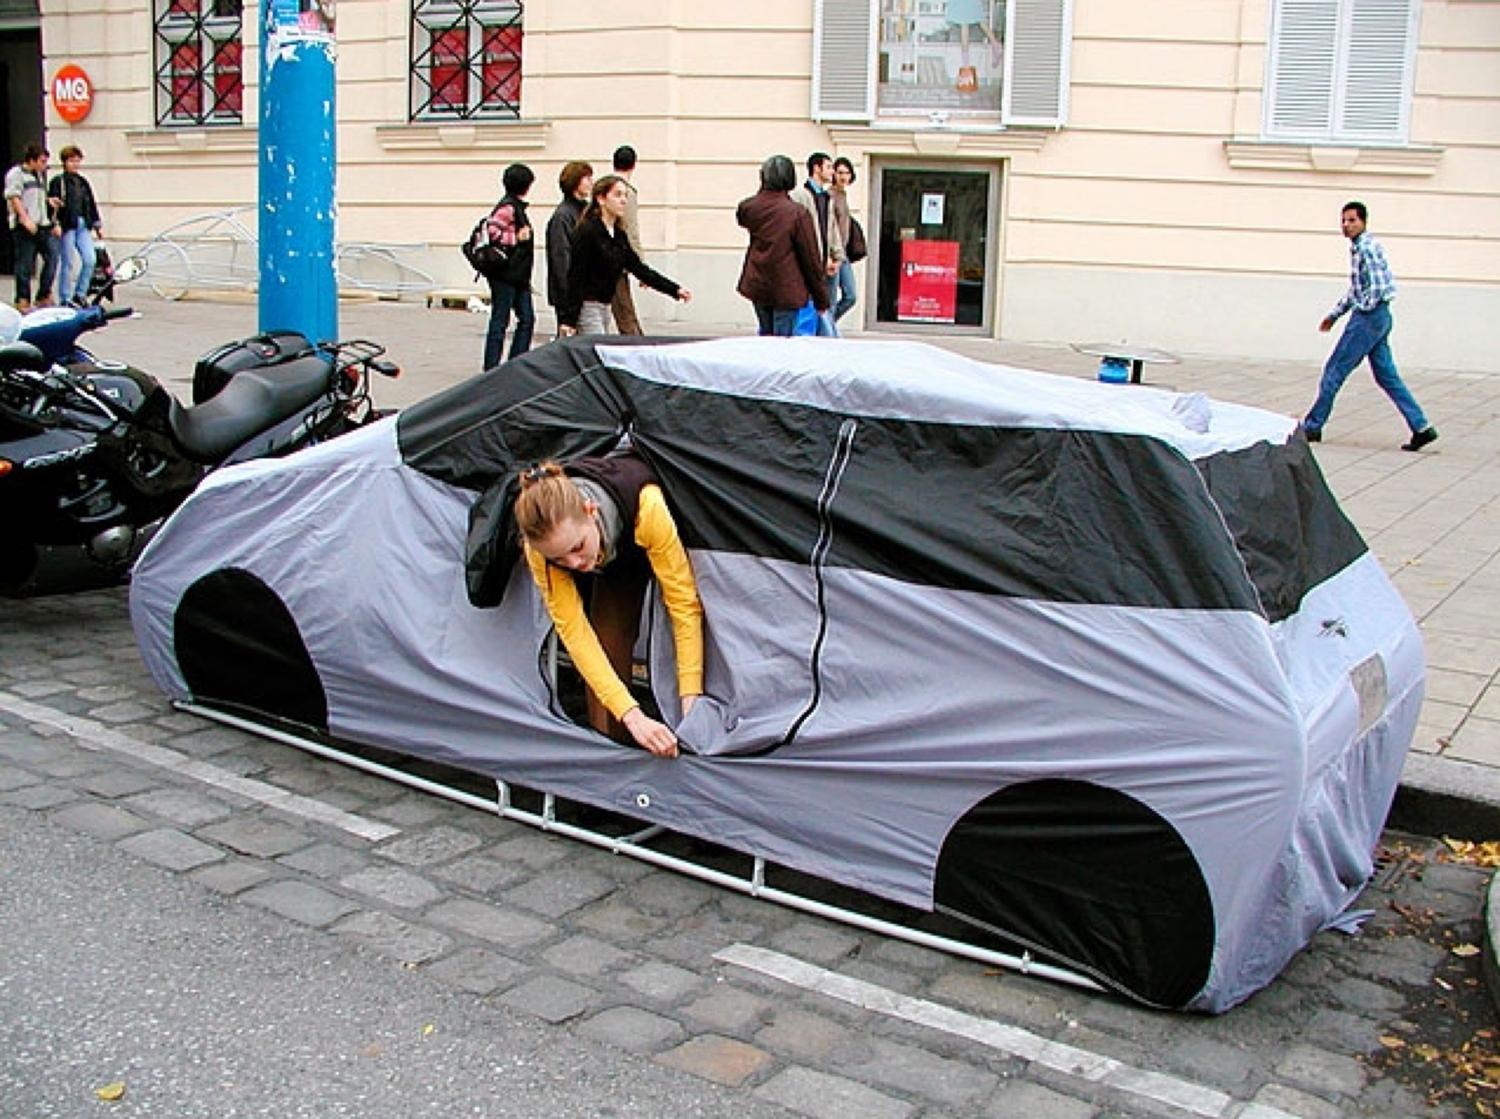 Car Shaped Tent Is Perfect For Urban Camping and Holding Parking Spaces - Urban Camping Tent shaped like car